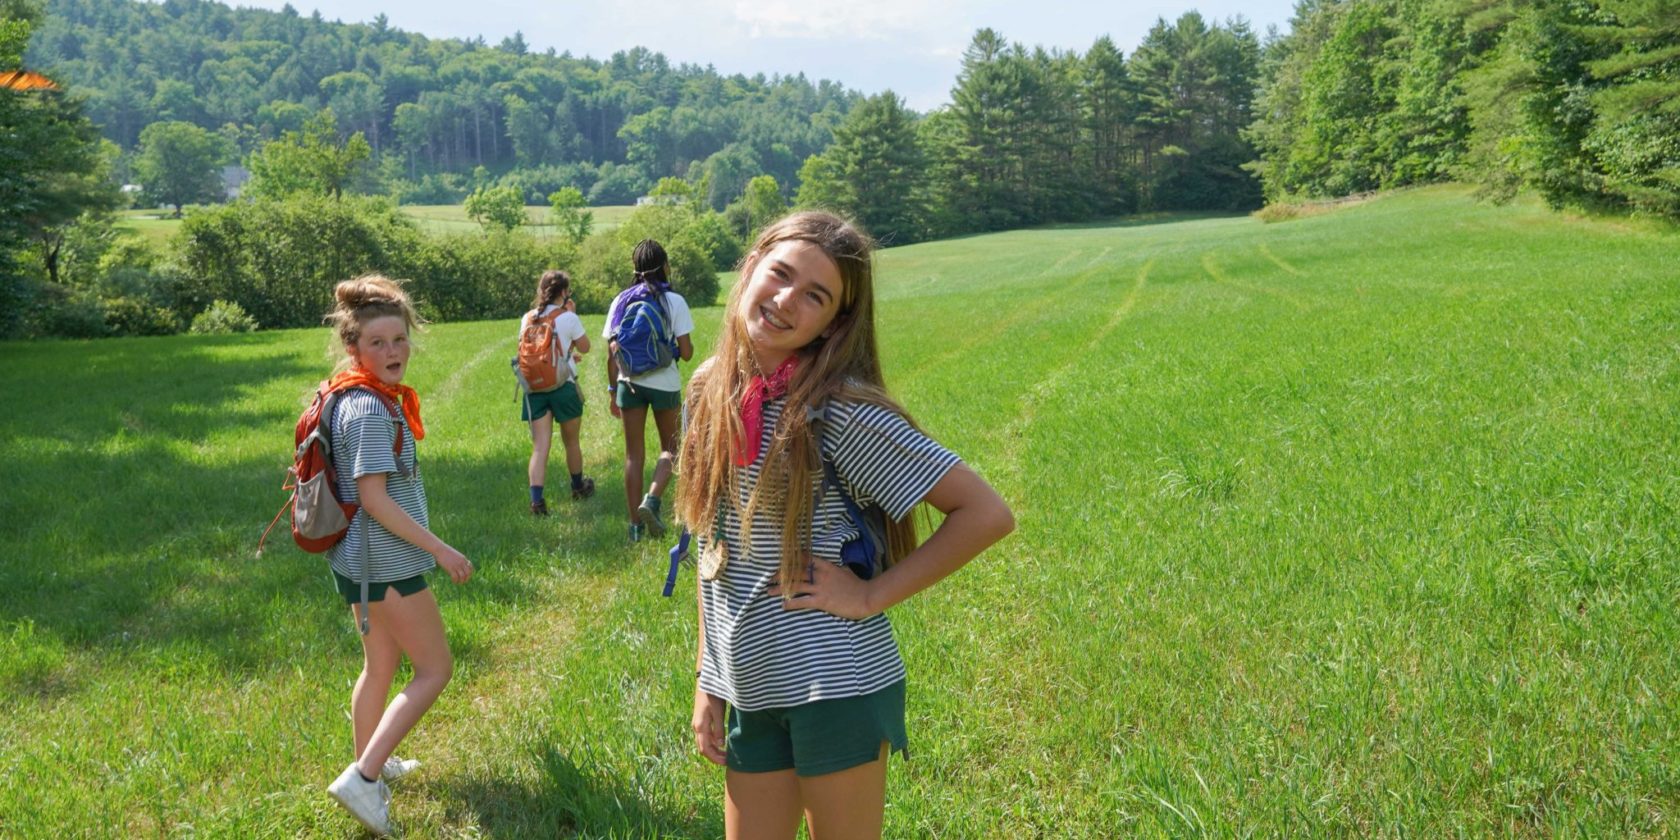 A smiling Hiver with a small camper group in a grassy field on a hike.